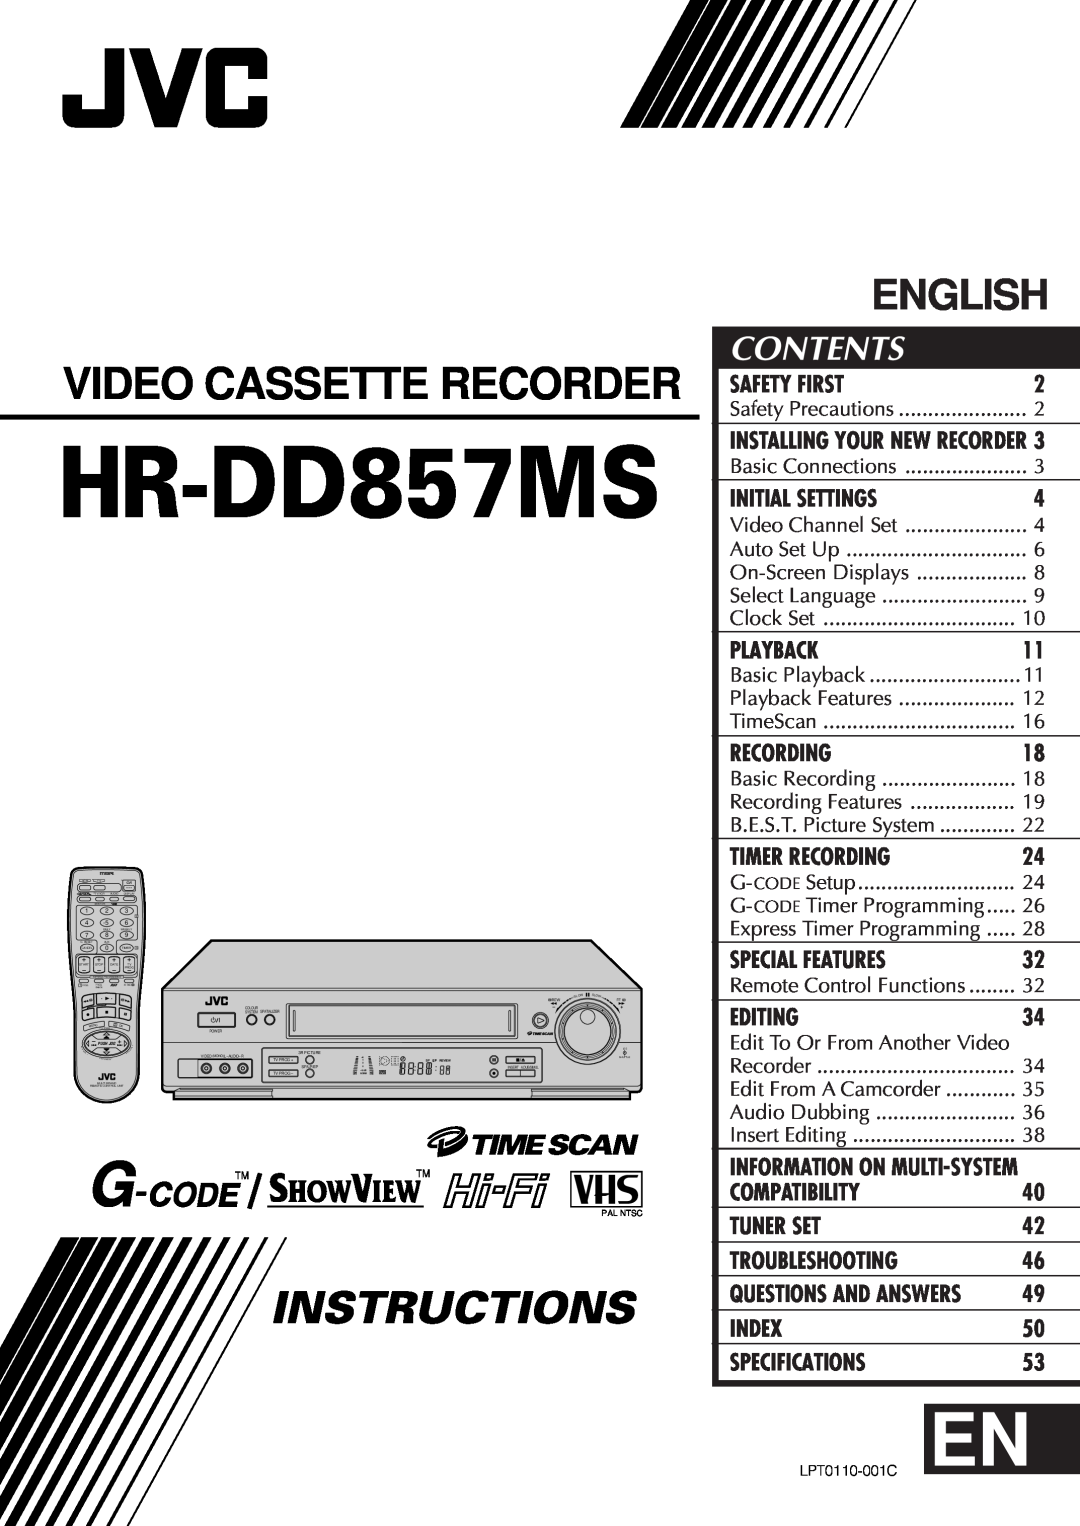 JVC HR-DD857MS specifications Video Cassette Recorder, Instructions, English, Contents 